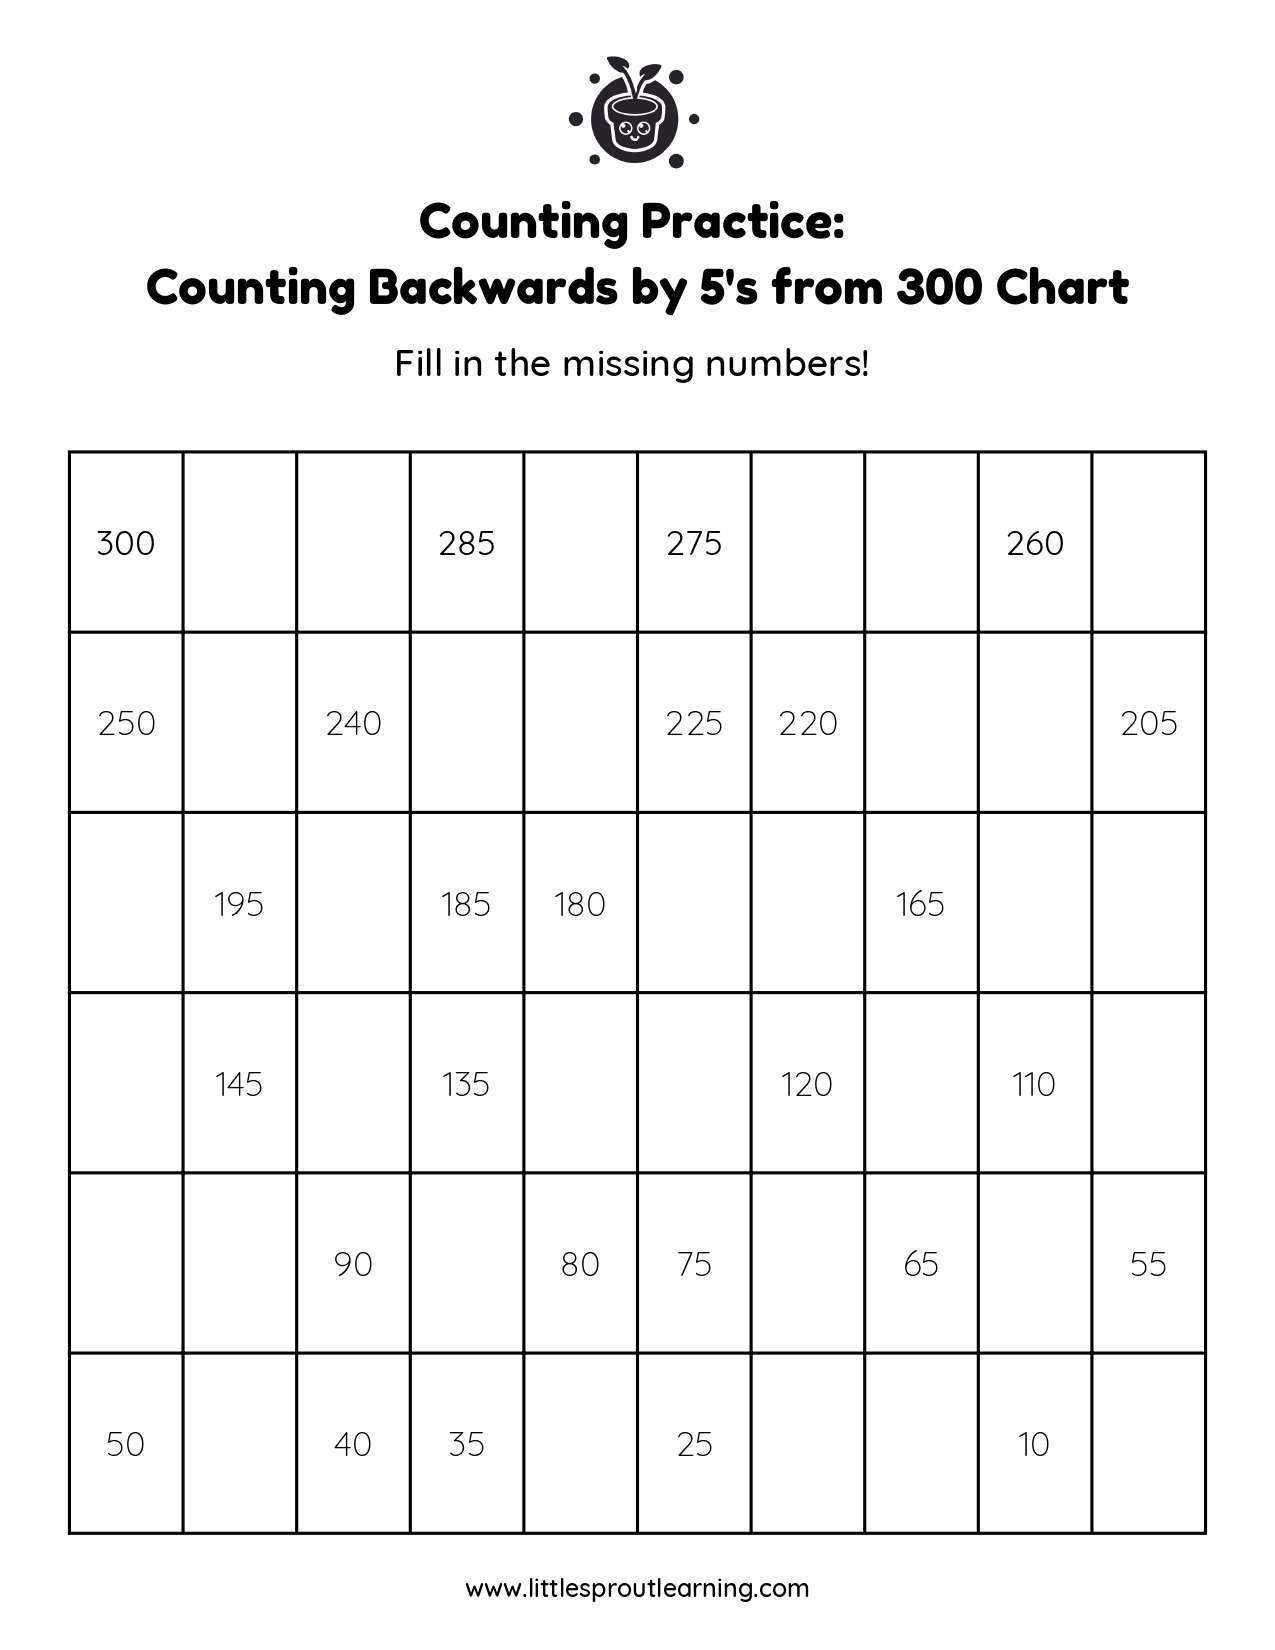 Counting Backwards by 5’s from 300 – Fill in the Blanks